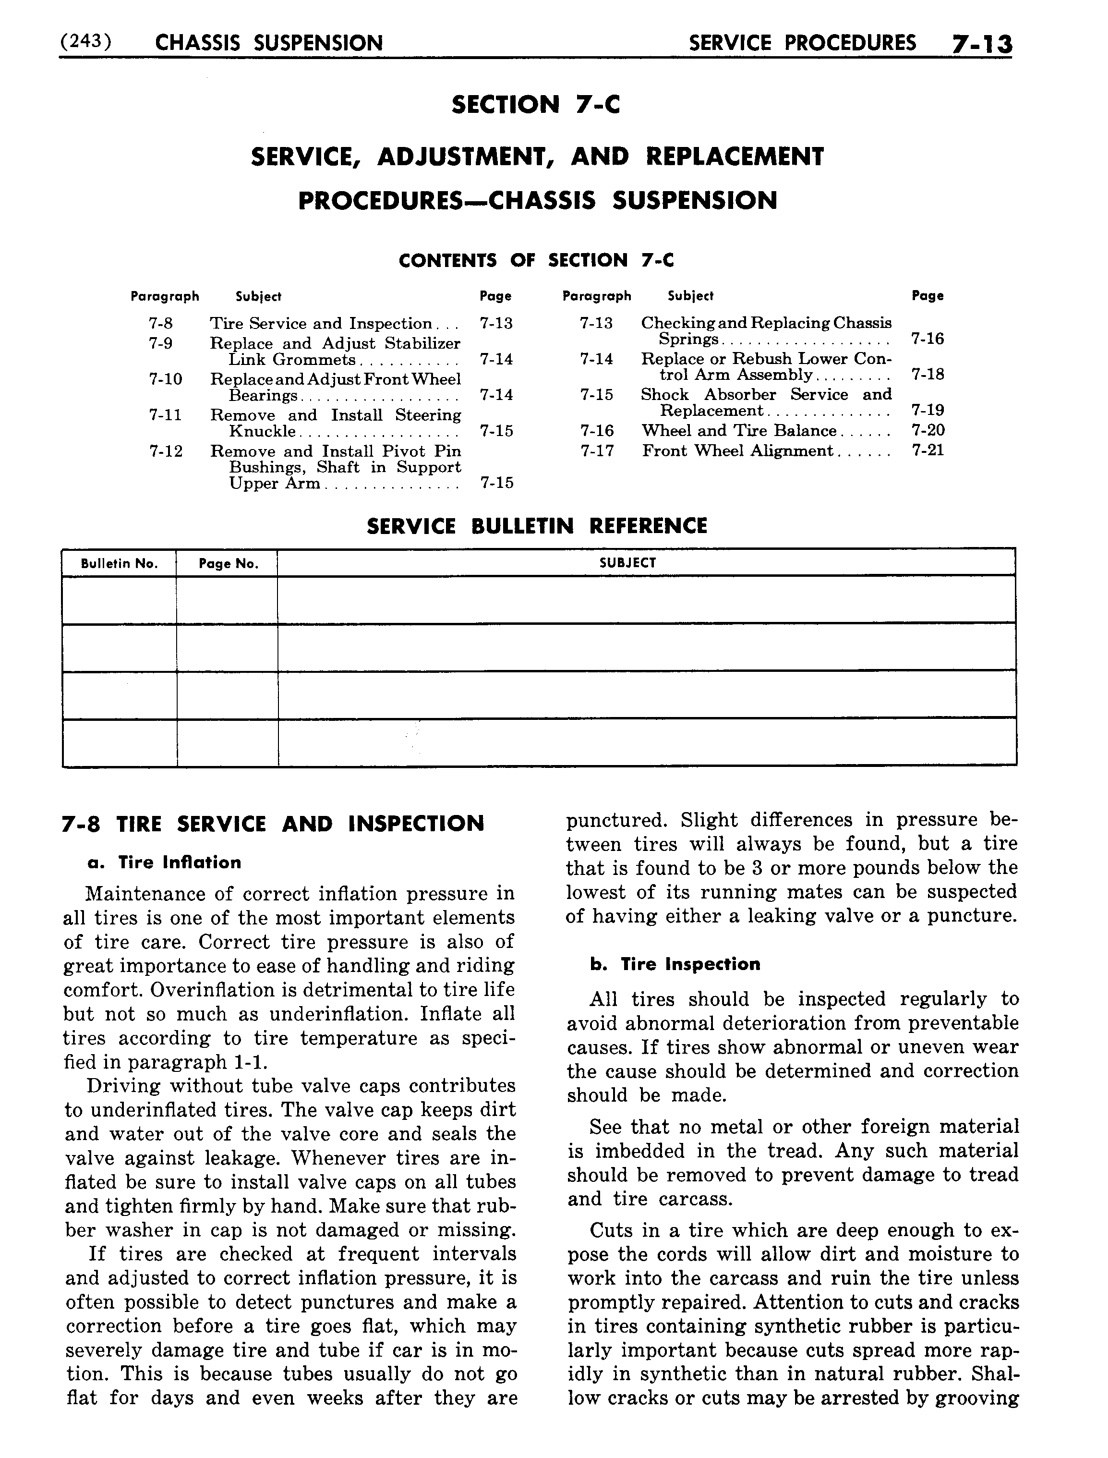 n_08 1954 Buick Shop Manual - Chassis Suspension-013-013.jpg